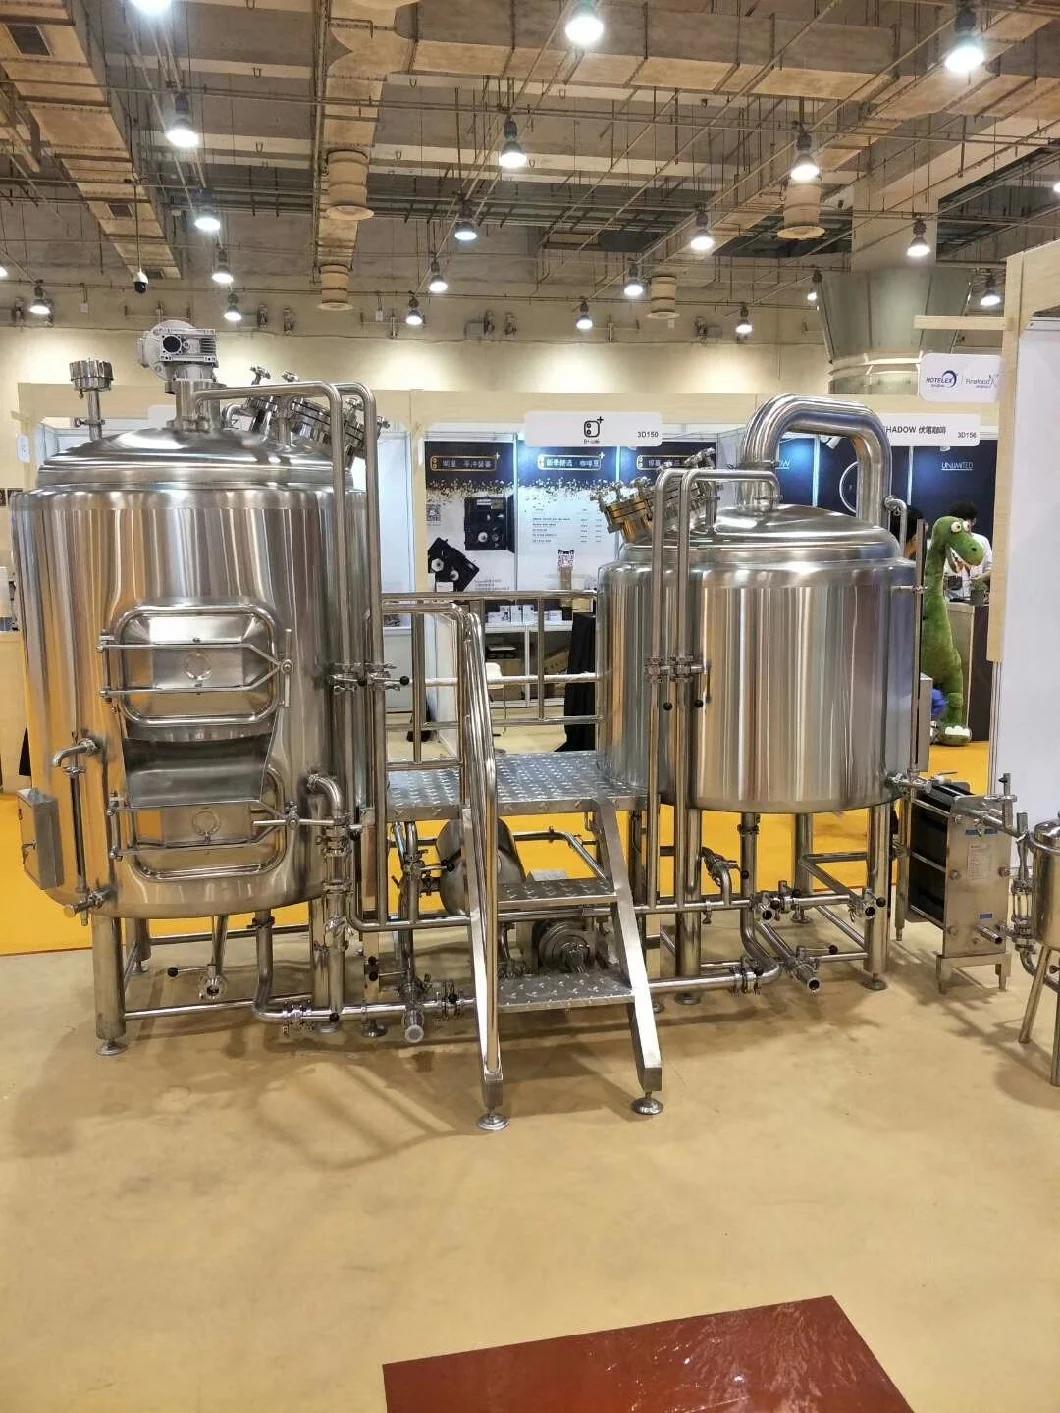 SUS304 Beer Brewing Machine 200L 300L Beer Brewing Equipment for Commercial Brewery